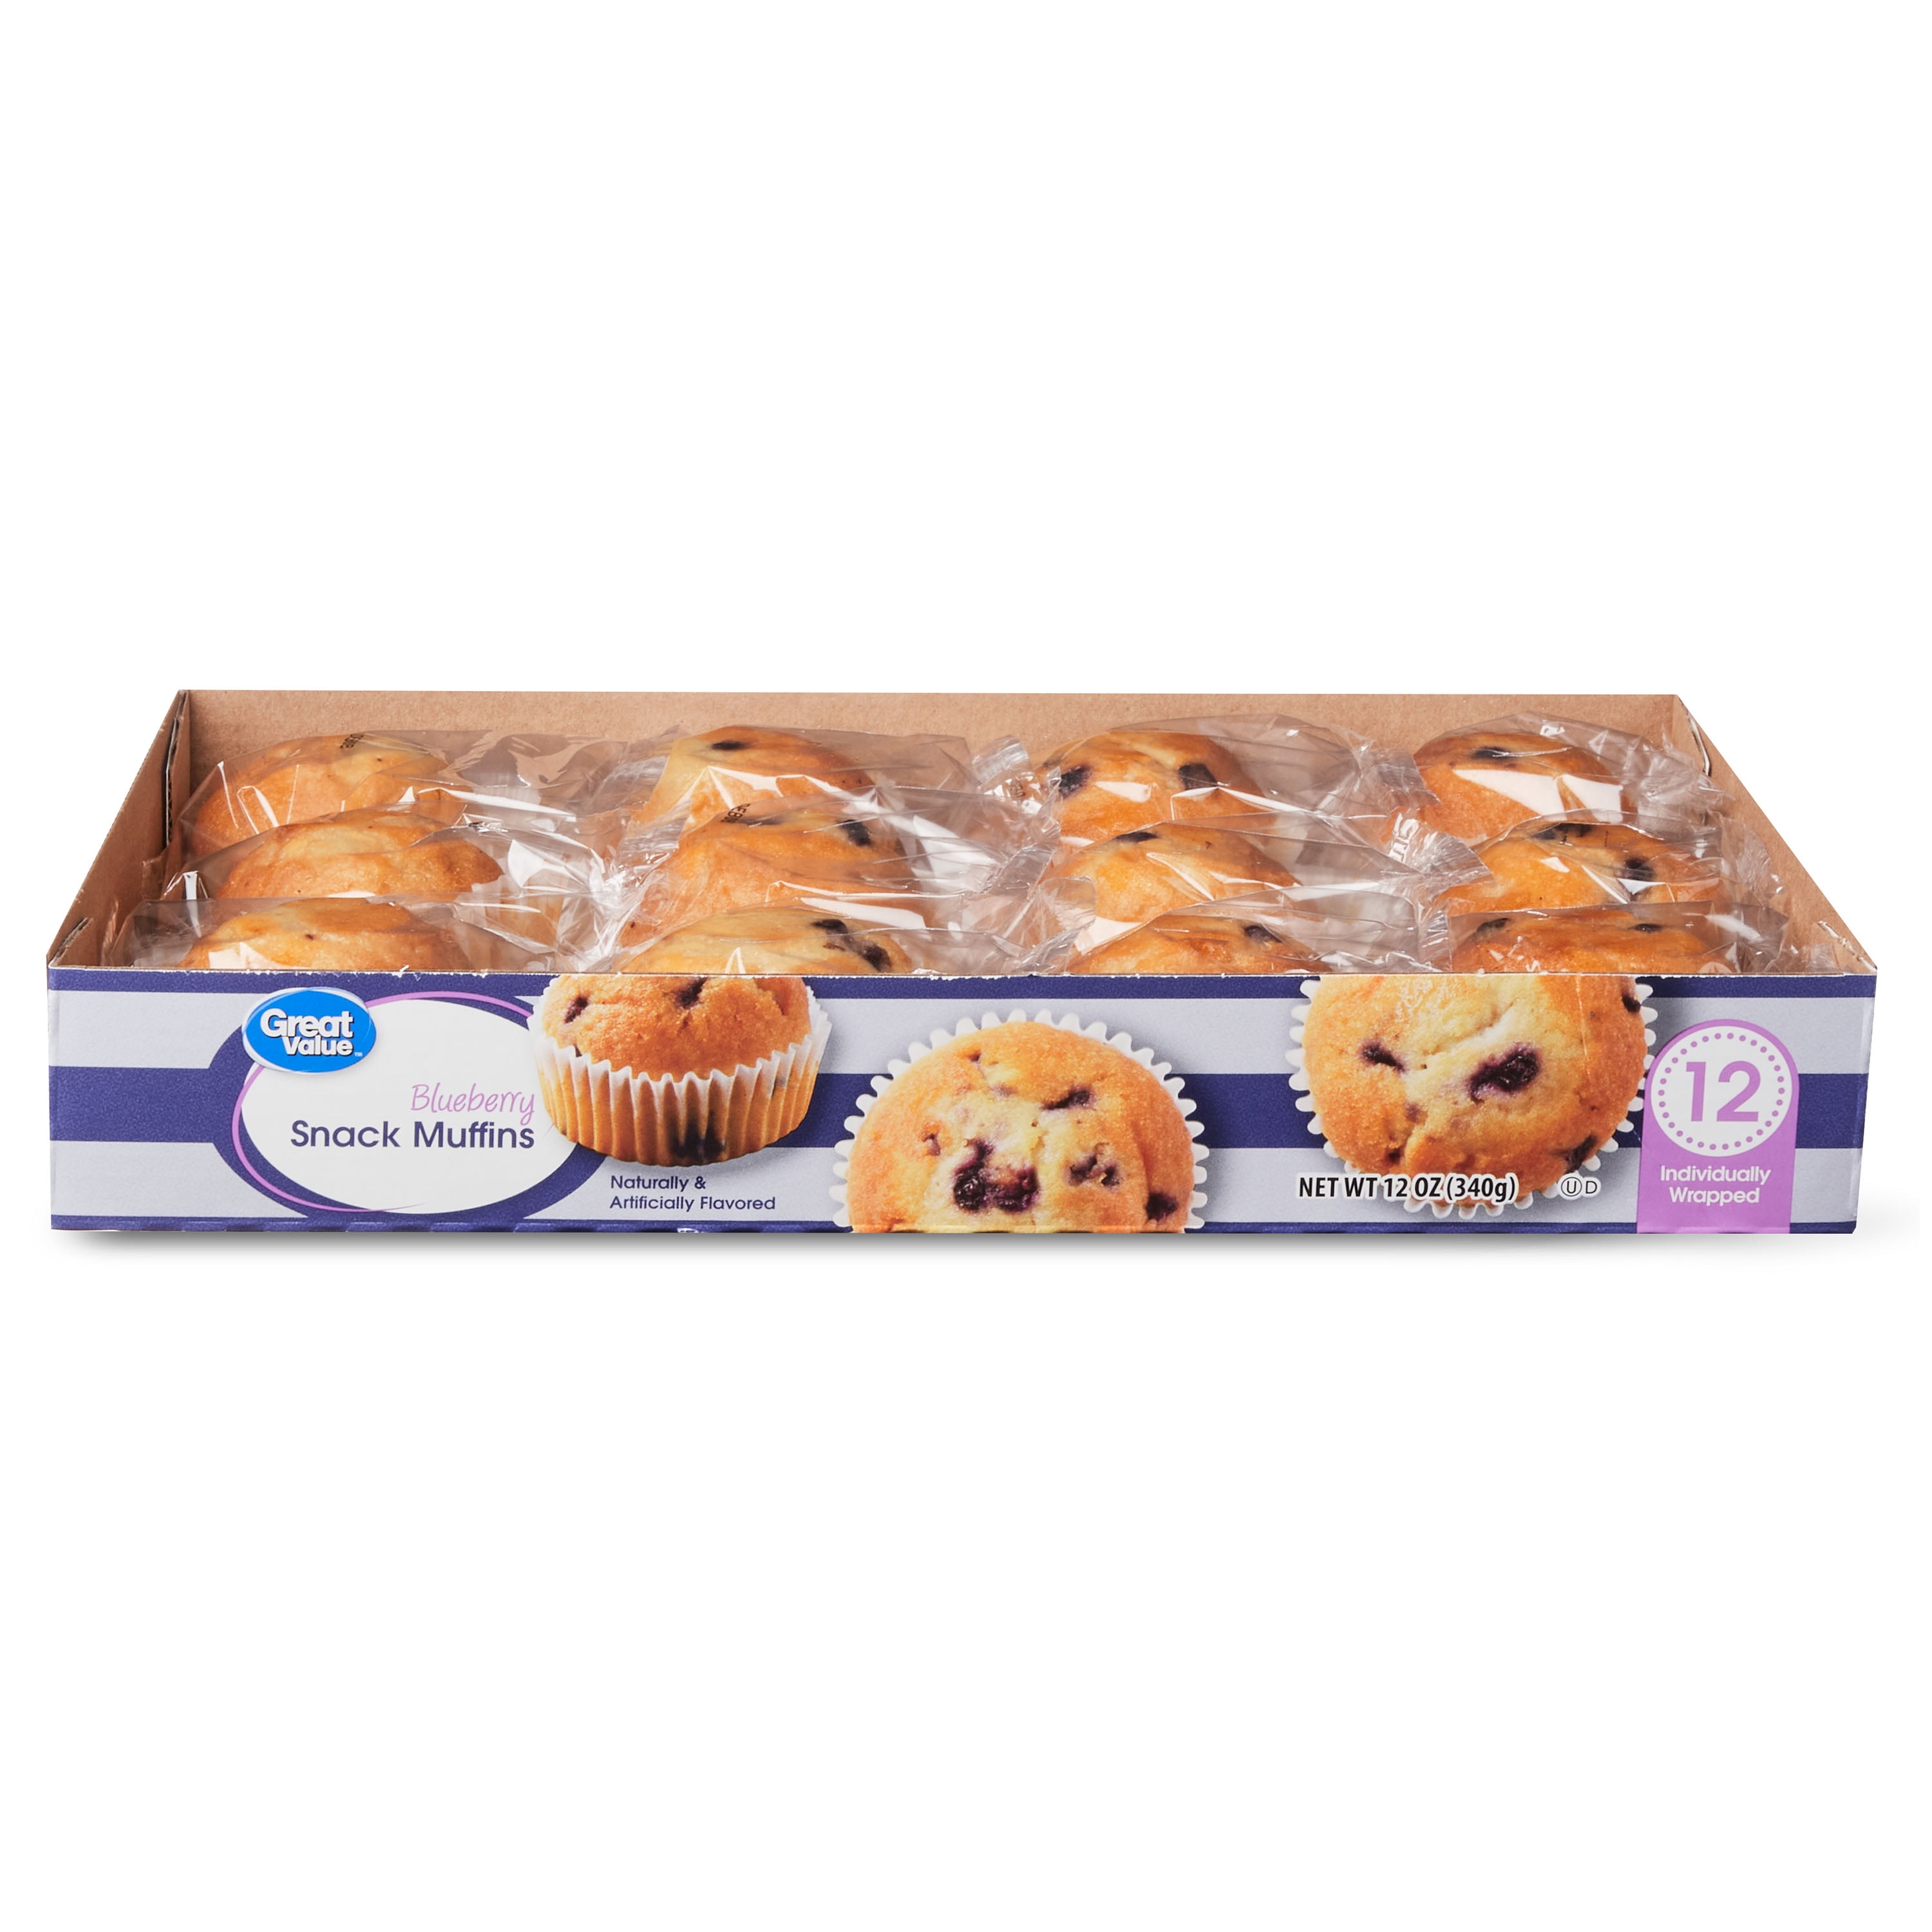 Great Value Blueberry Snack Muffins, 12 oz, 12 Count